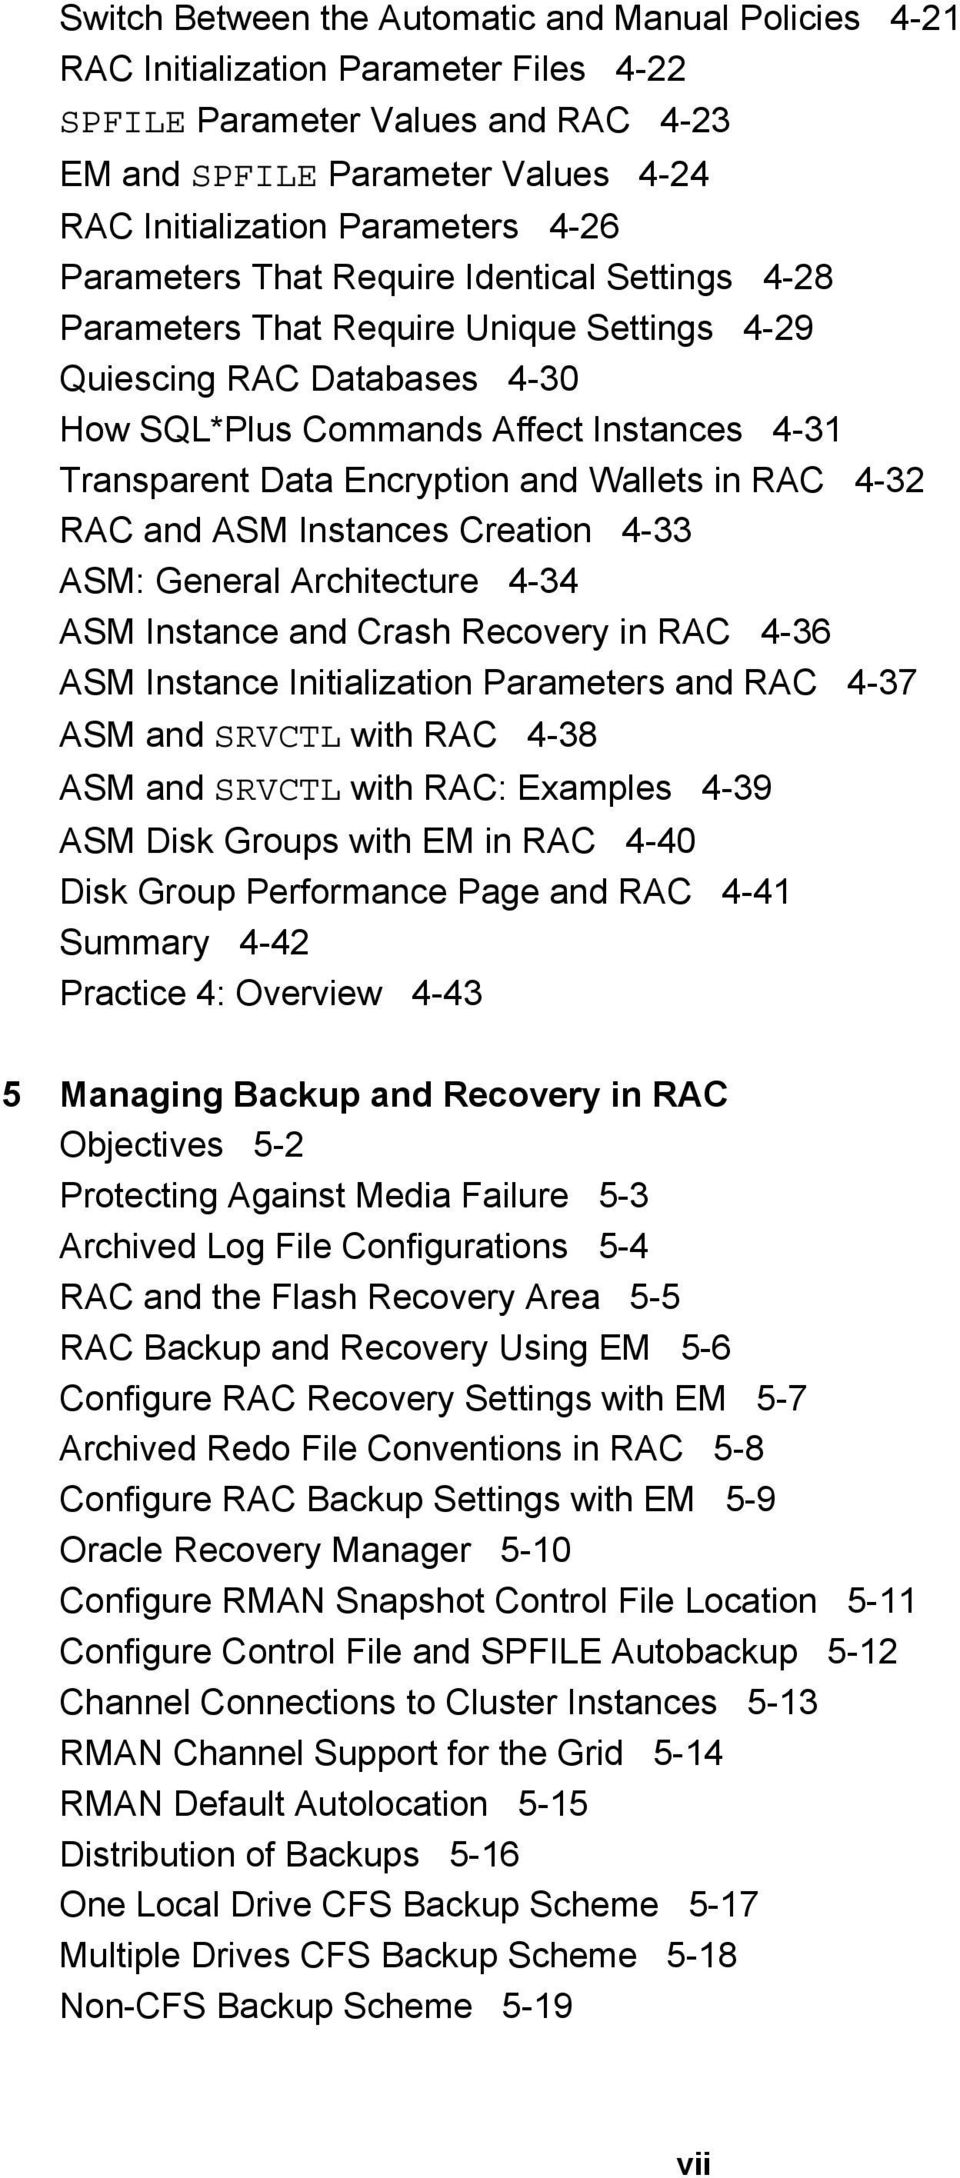 and Wallets in RAC 4-32 RAC and ASM Instances Creation 4-33 ASM: General Architecture 4-34 ASM Instance and Crash Recovery in RAC 4-36 ASM Instance Initialization Parameters and RAC 4-37 ASM and